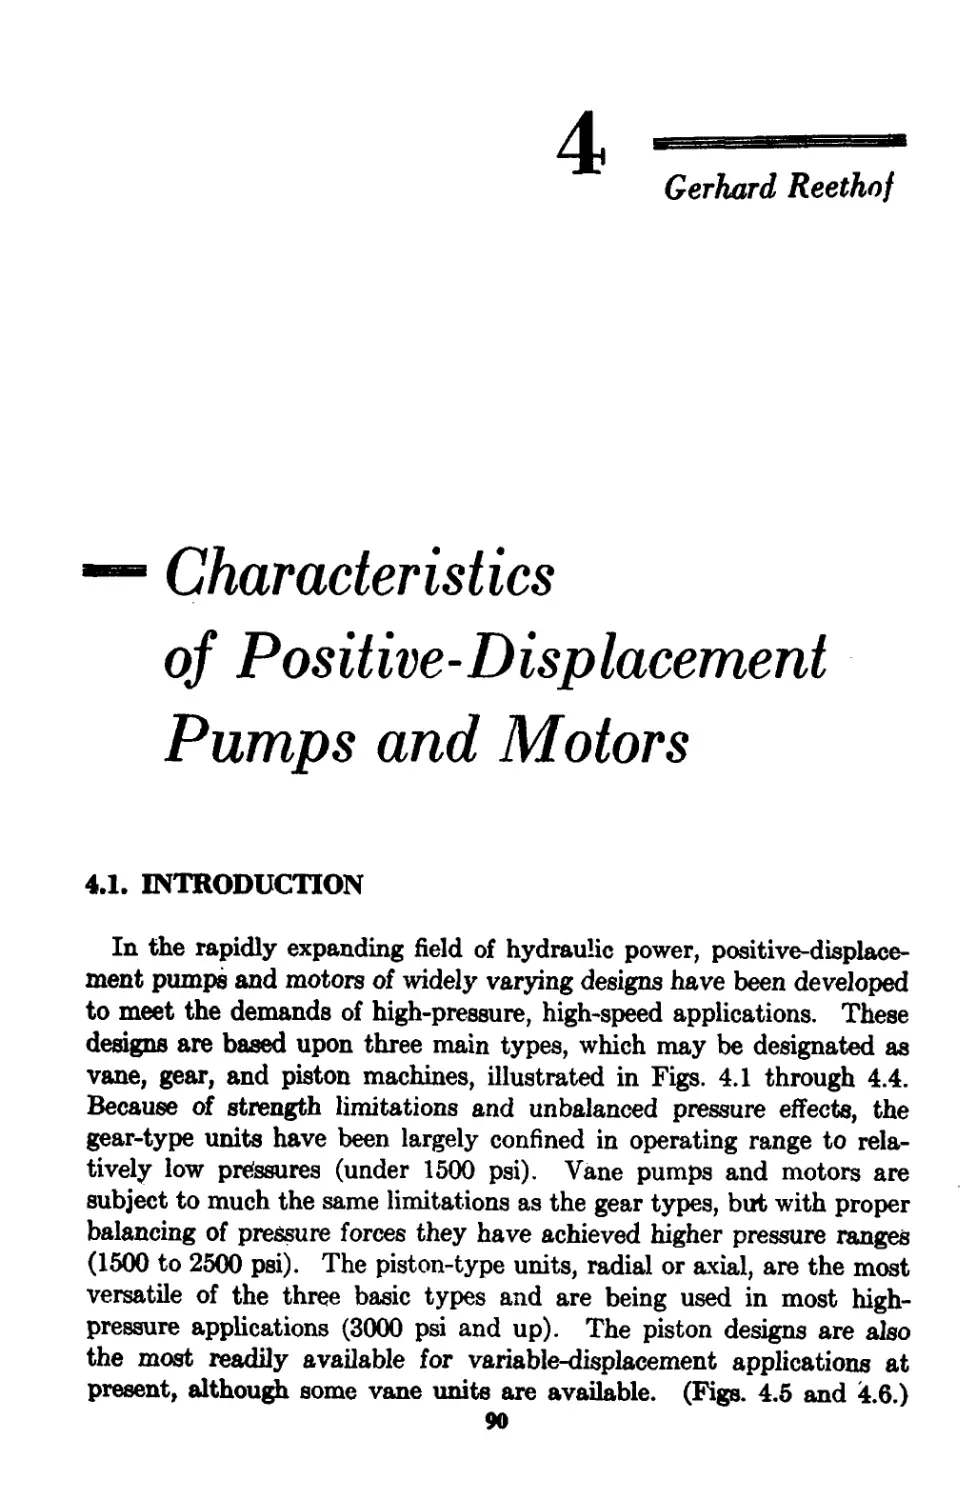 Chapter 4 Characteristics of Positive-Displacement Pumps and Motors:Gerhard Reethof